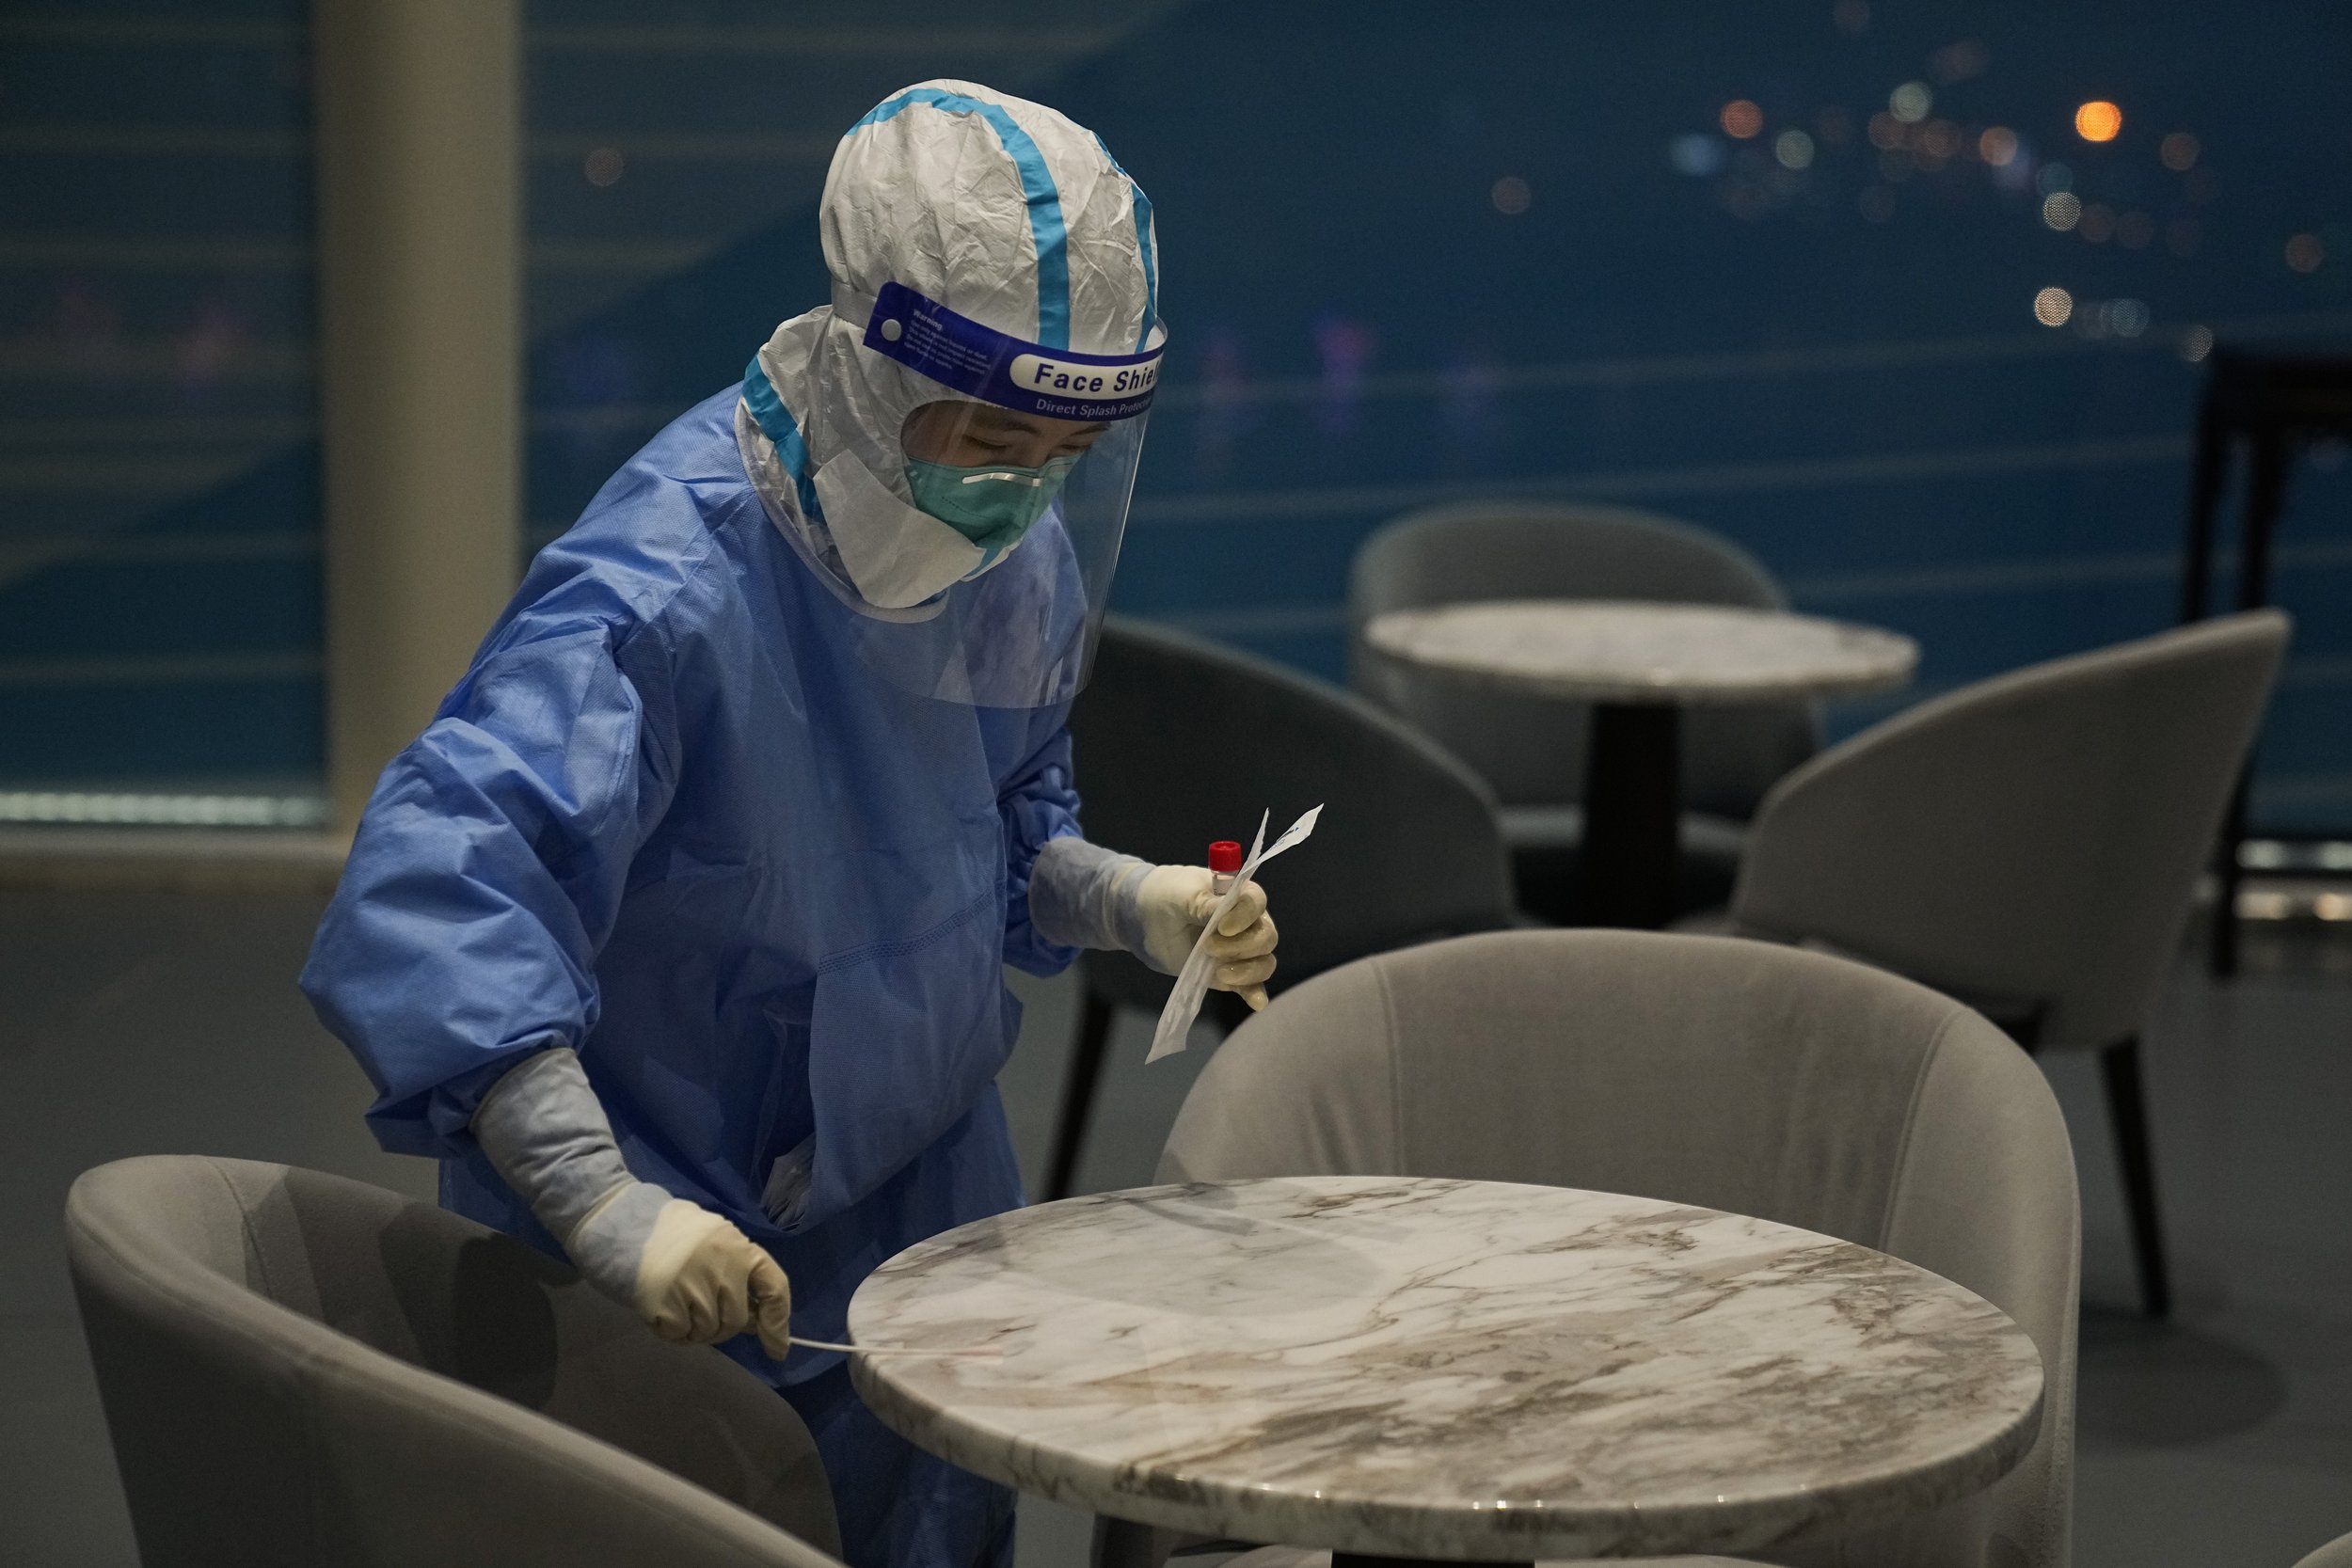  A medical worker collects a sample from a table for COVID testing in the lounge area of the main media center at the 2022 Winter Olympics, Friday, Feb. 11, 2022, in Beijing. (AP Photo/Jae C. Hong) 